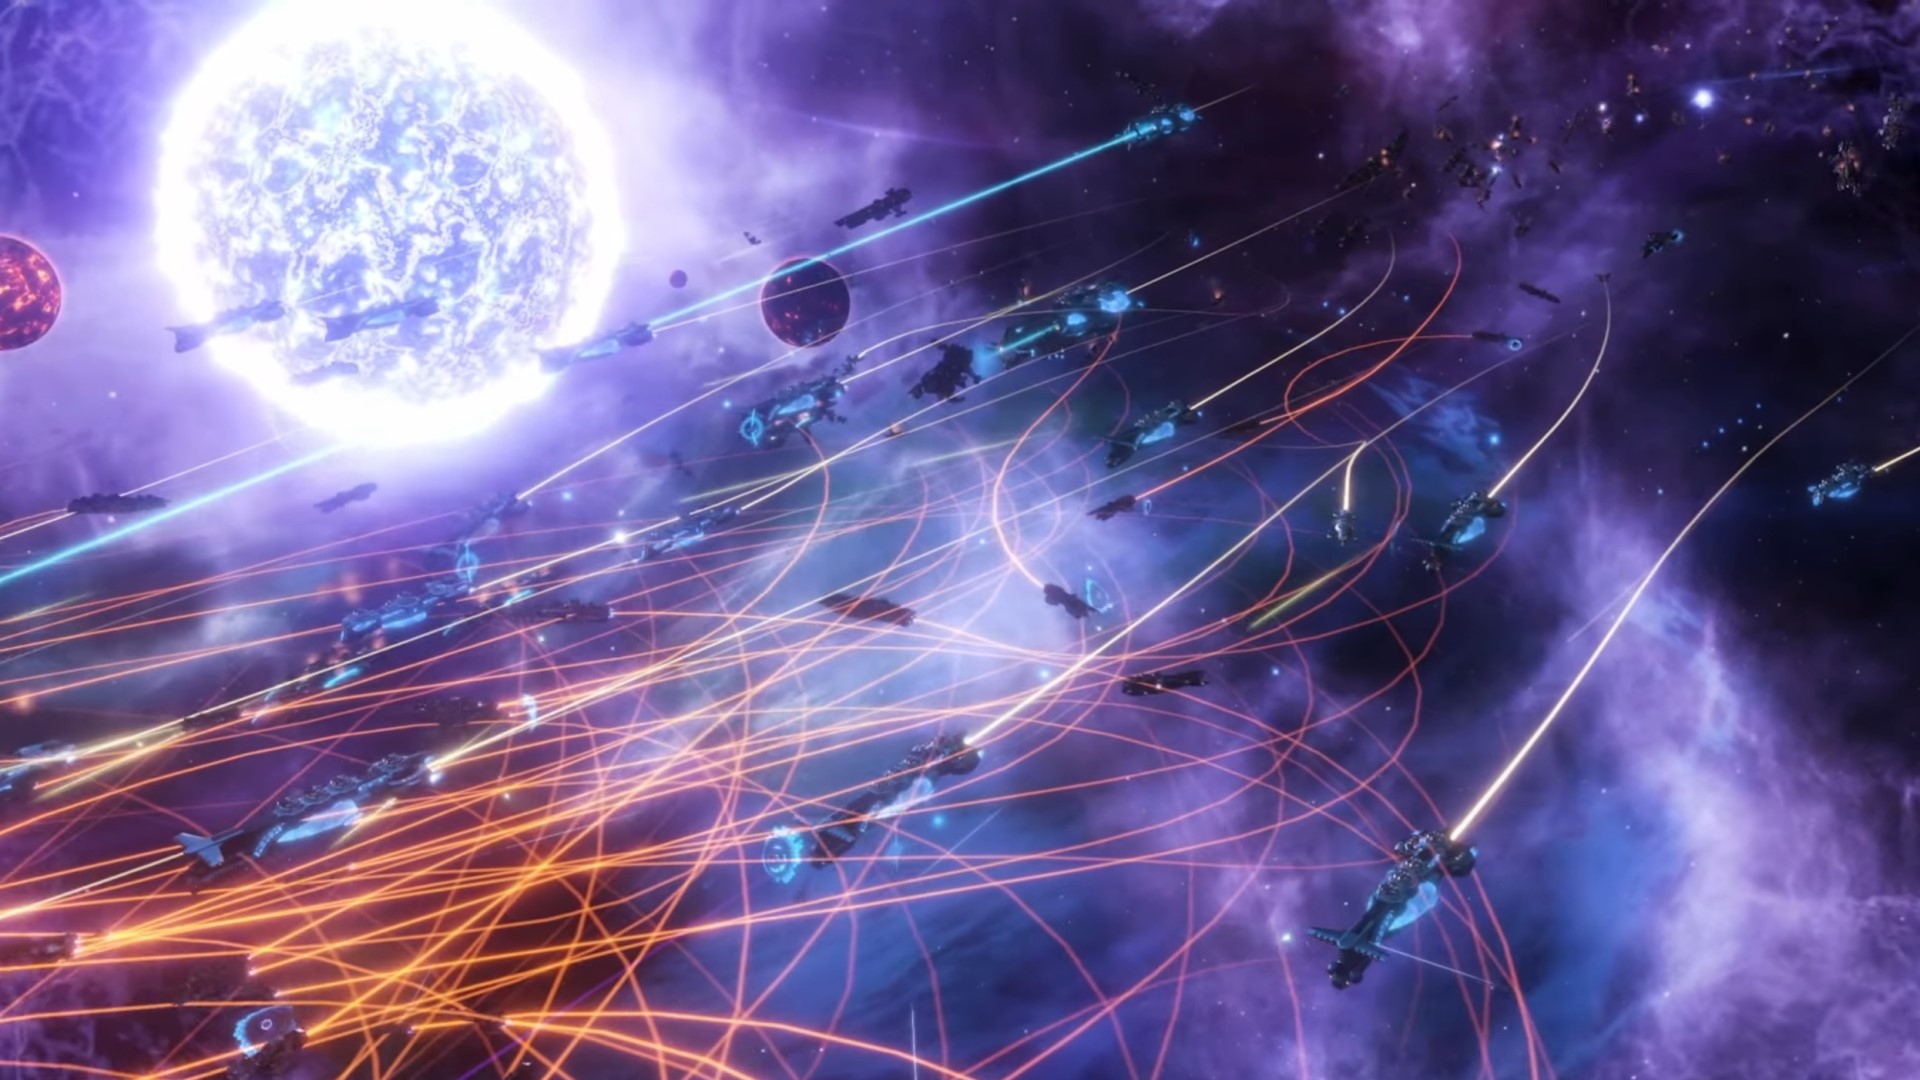 Stellaris Overlord director says rushed features led to bugs